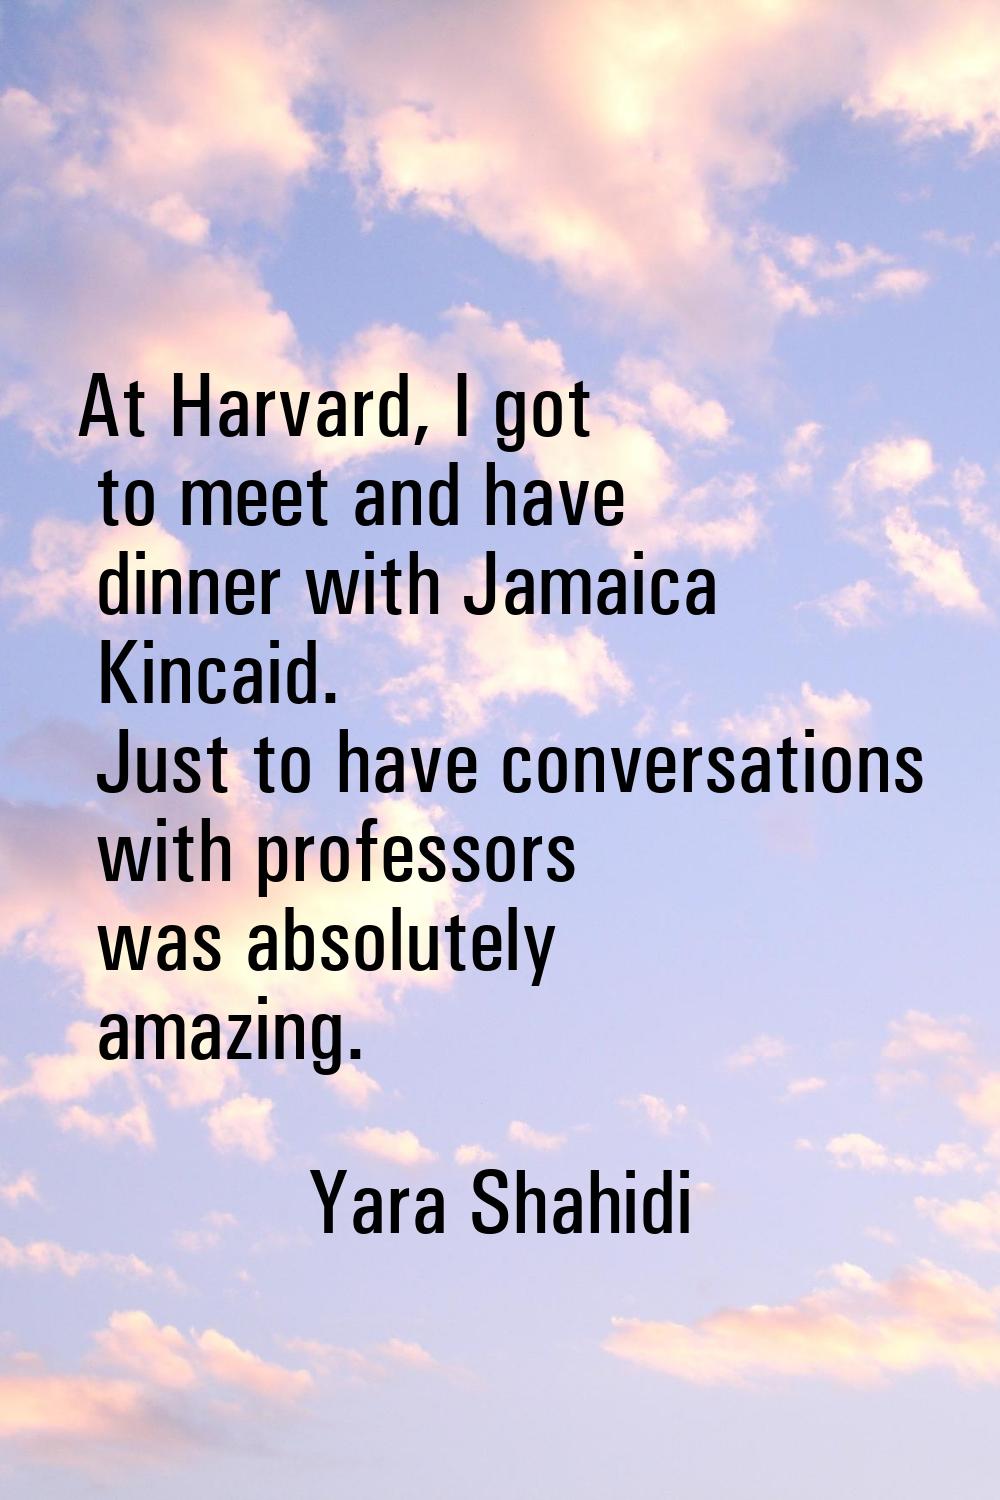 At Harvard, I got to meet and have dinner with Jamaica Kincaid. Just to have conversations with pro